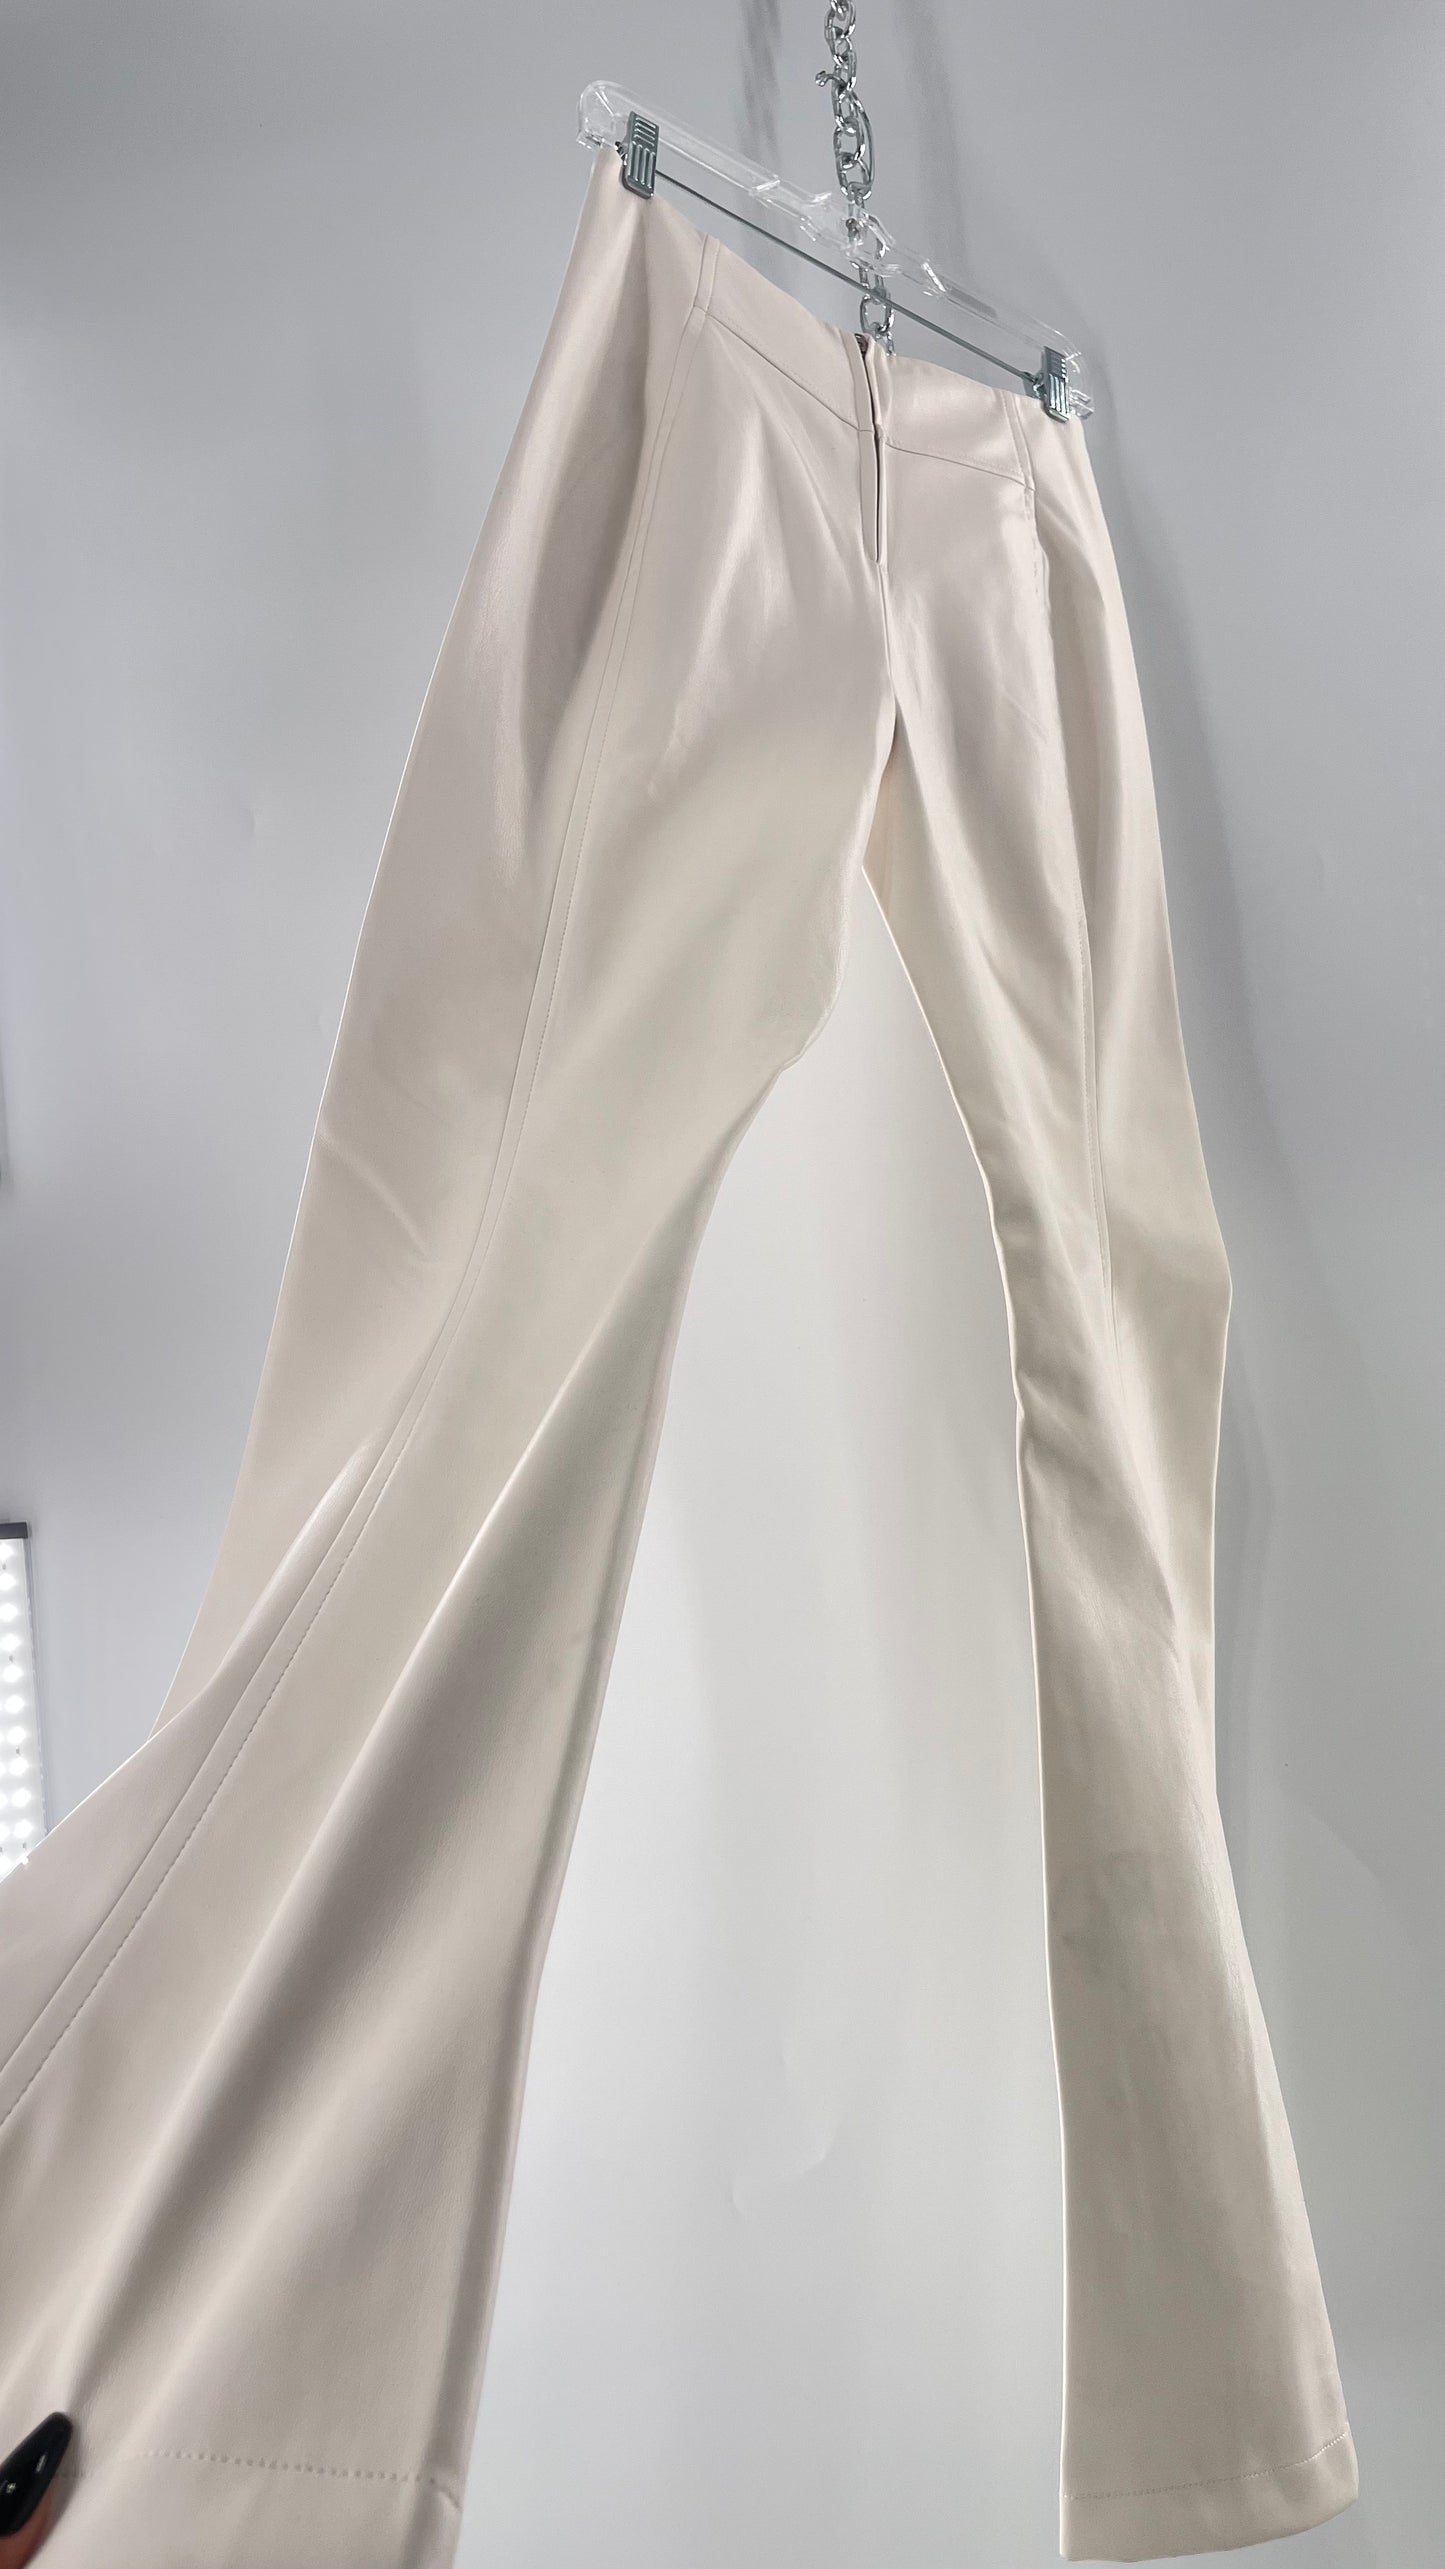 Free People White Cream Faux Flare Leather Pants (29)